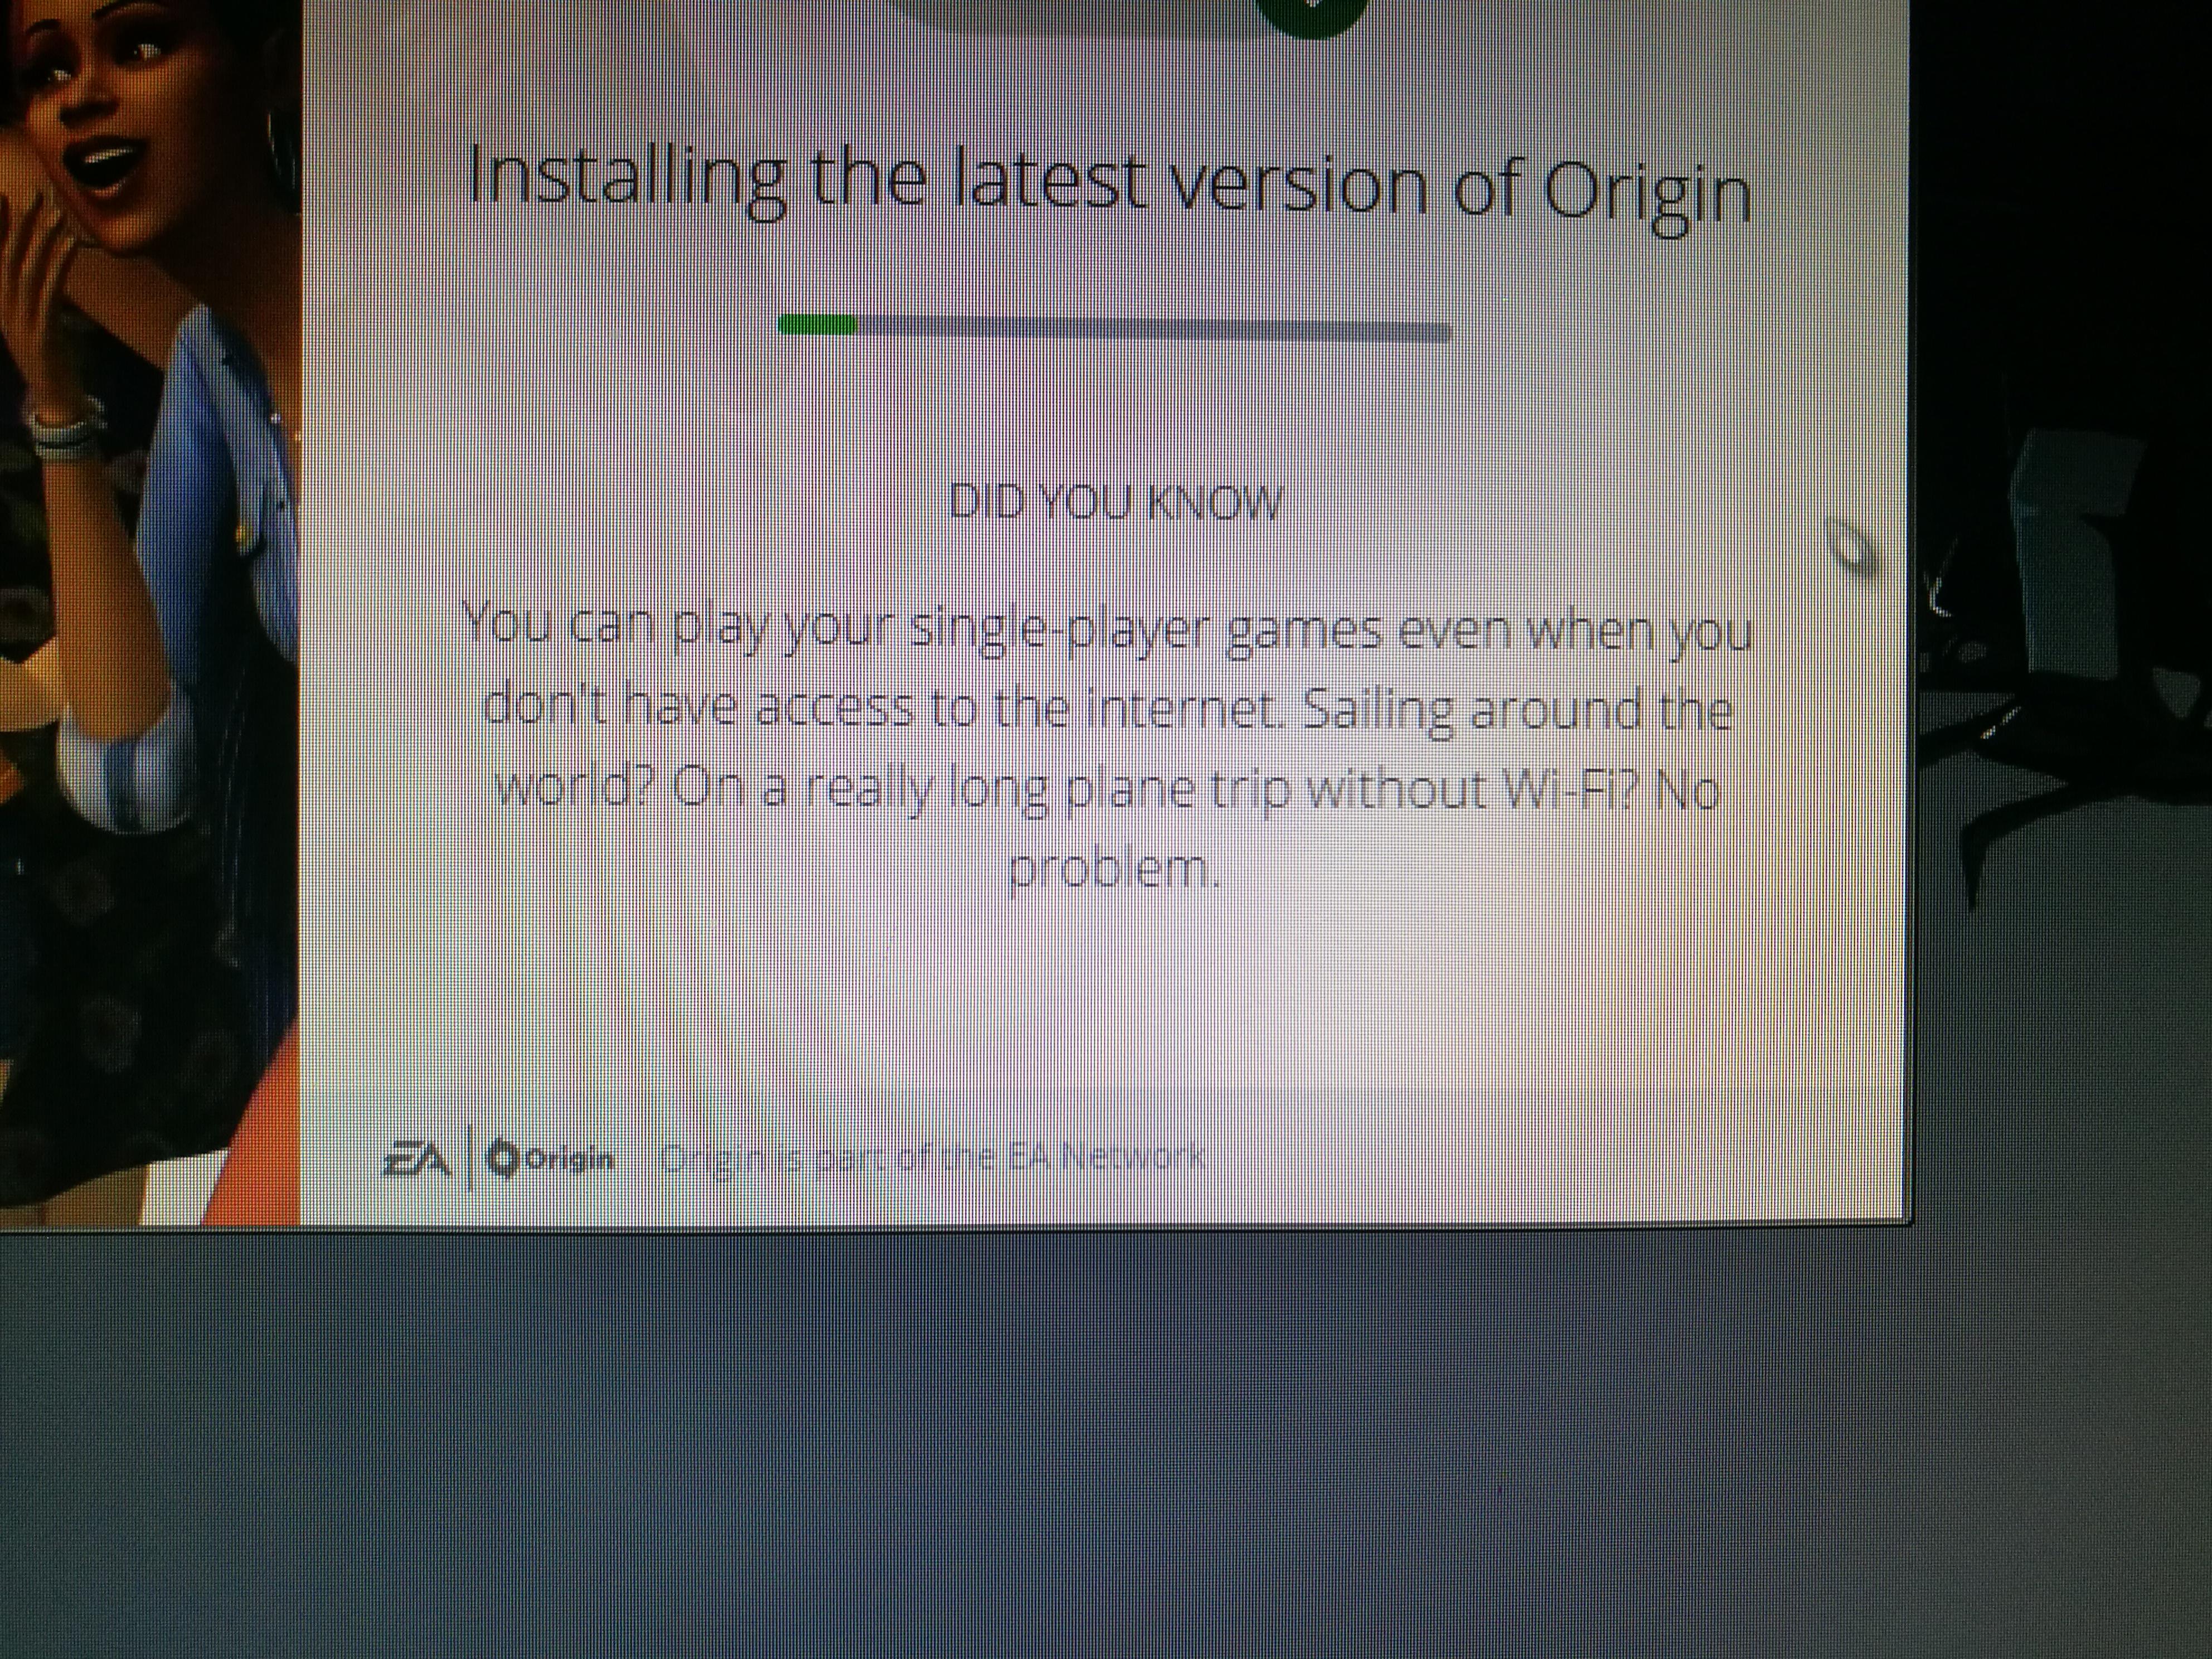 presentation - Installing the latest version of Origin Did You Know You can play your single player games even when you don't have access to the internet. Sailing around the world? On a really long plane trip without WiFi? No problem Ea Origin Originis pa